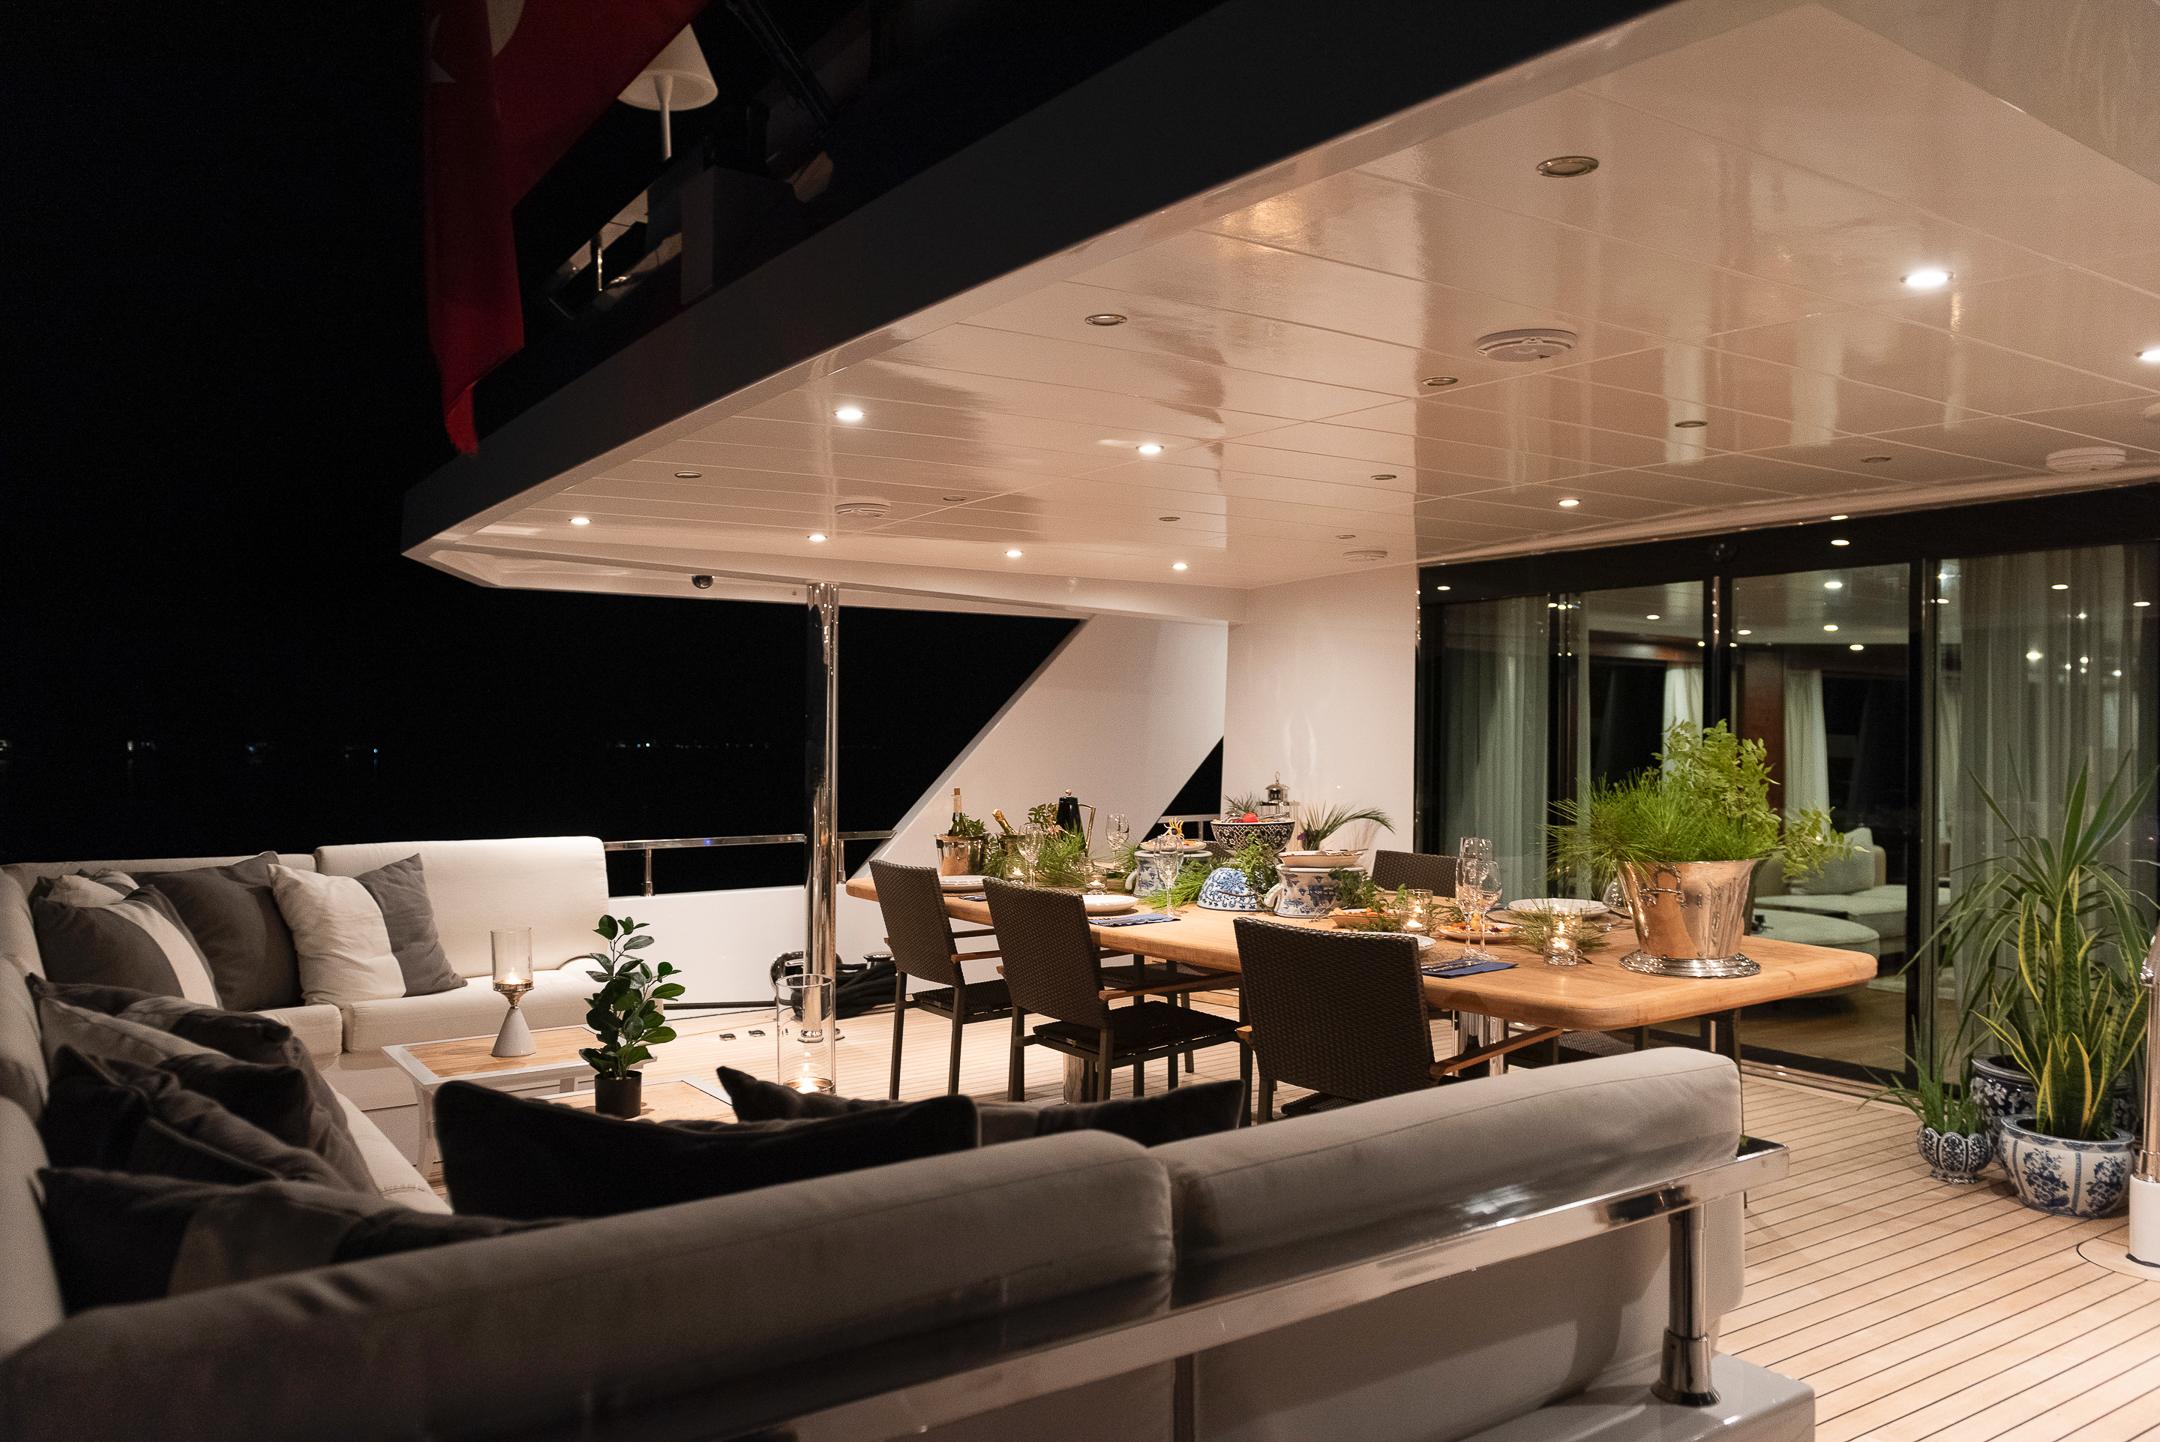 Main deck aft by night